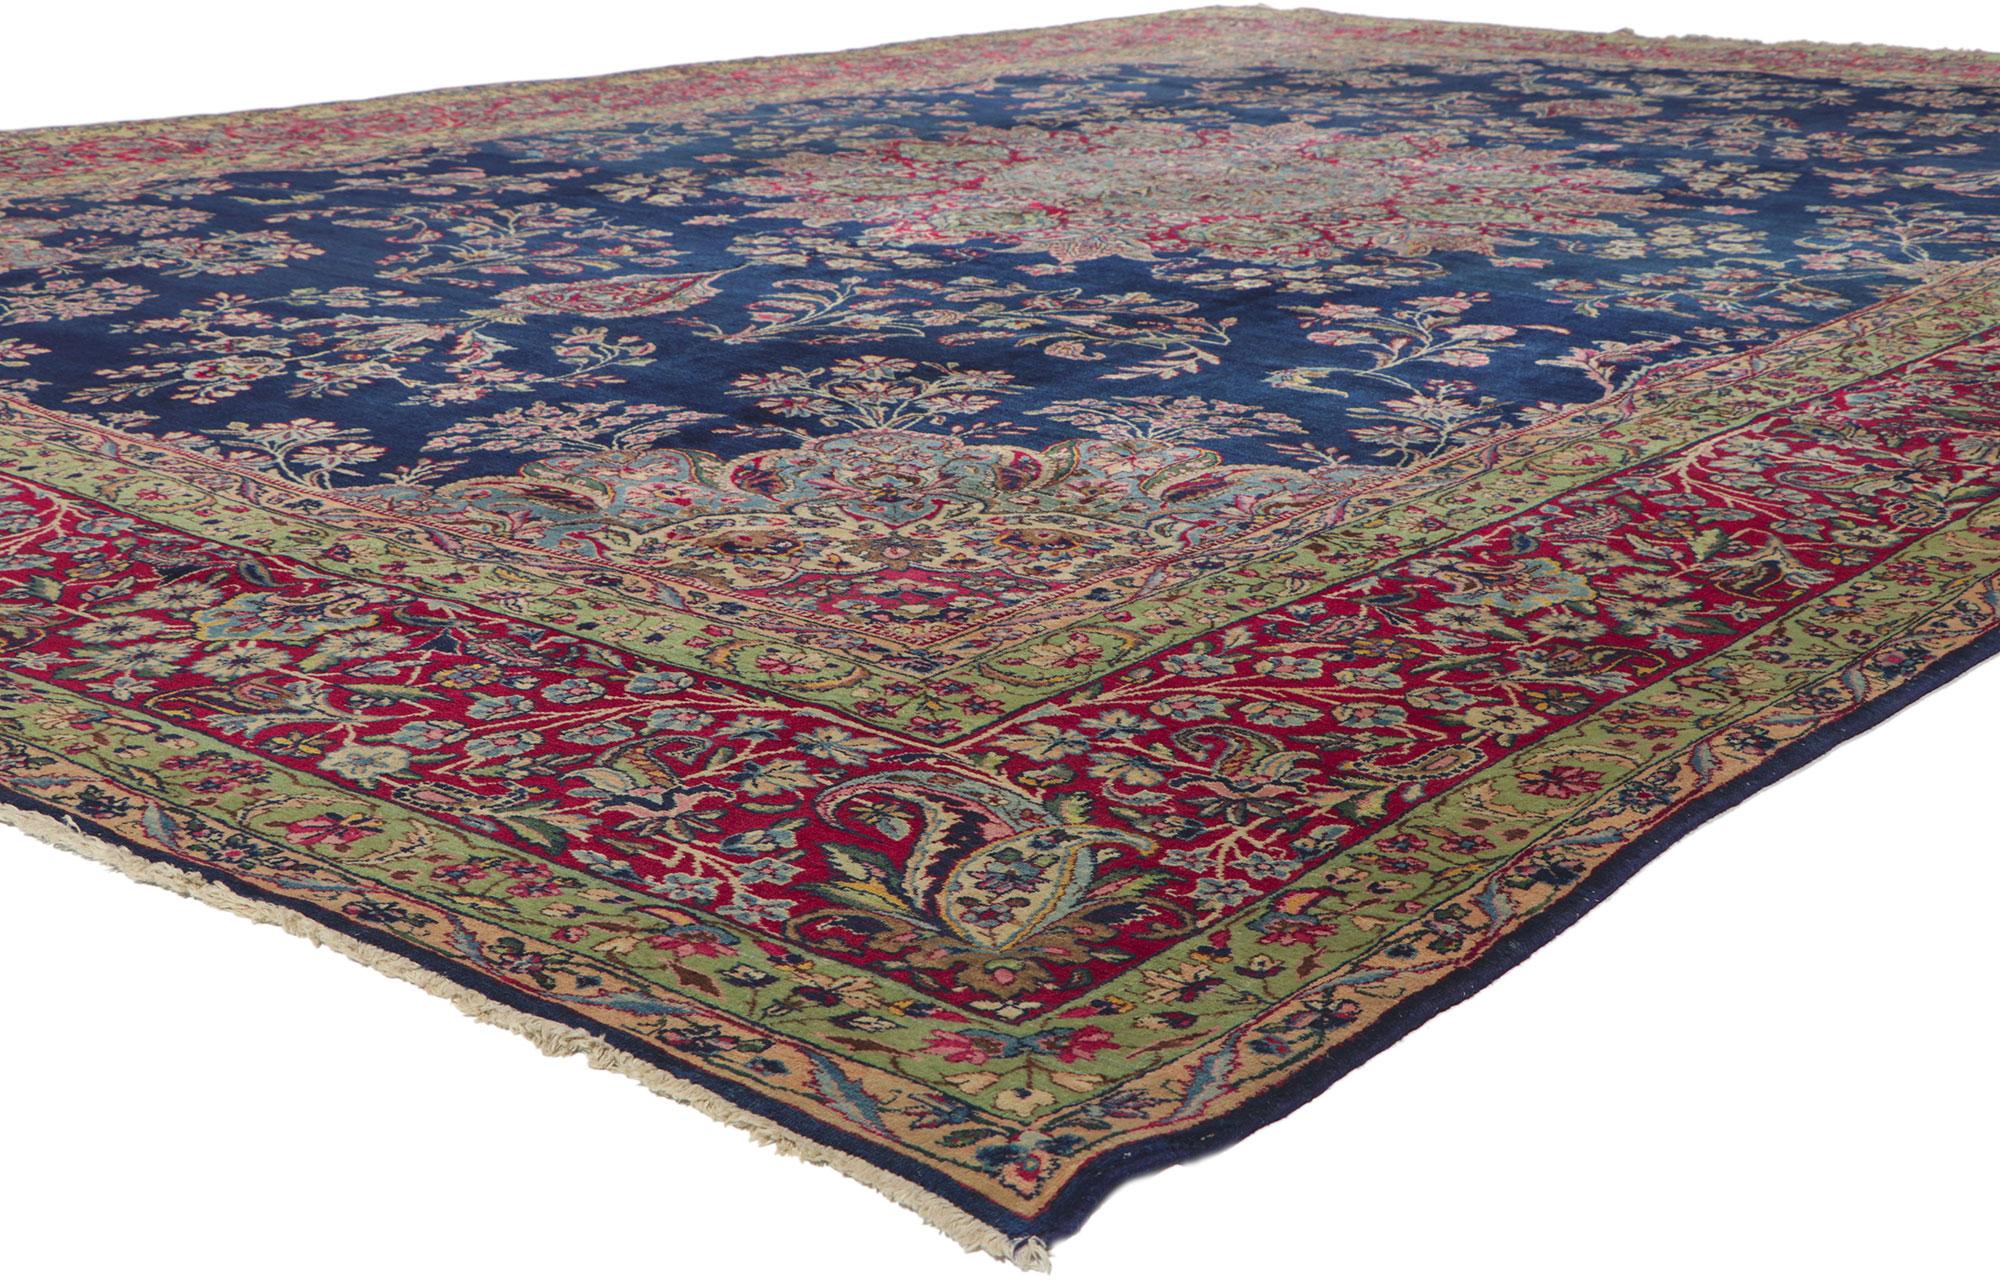 78336 Vintage Persian Kerman Rug, 11'04 x 15'10. Displaying an impressive array of floral elements with incredible detail and texture, this hand knotted vintage Persian Kerman rug is a captivating vision of woven beauty. The timeless design and